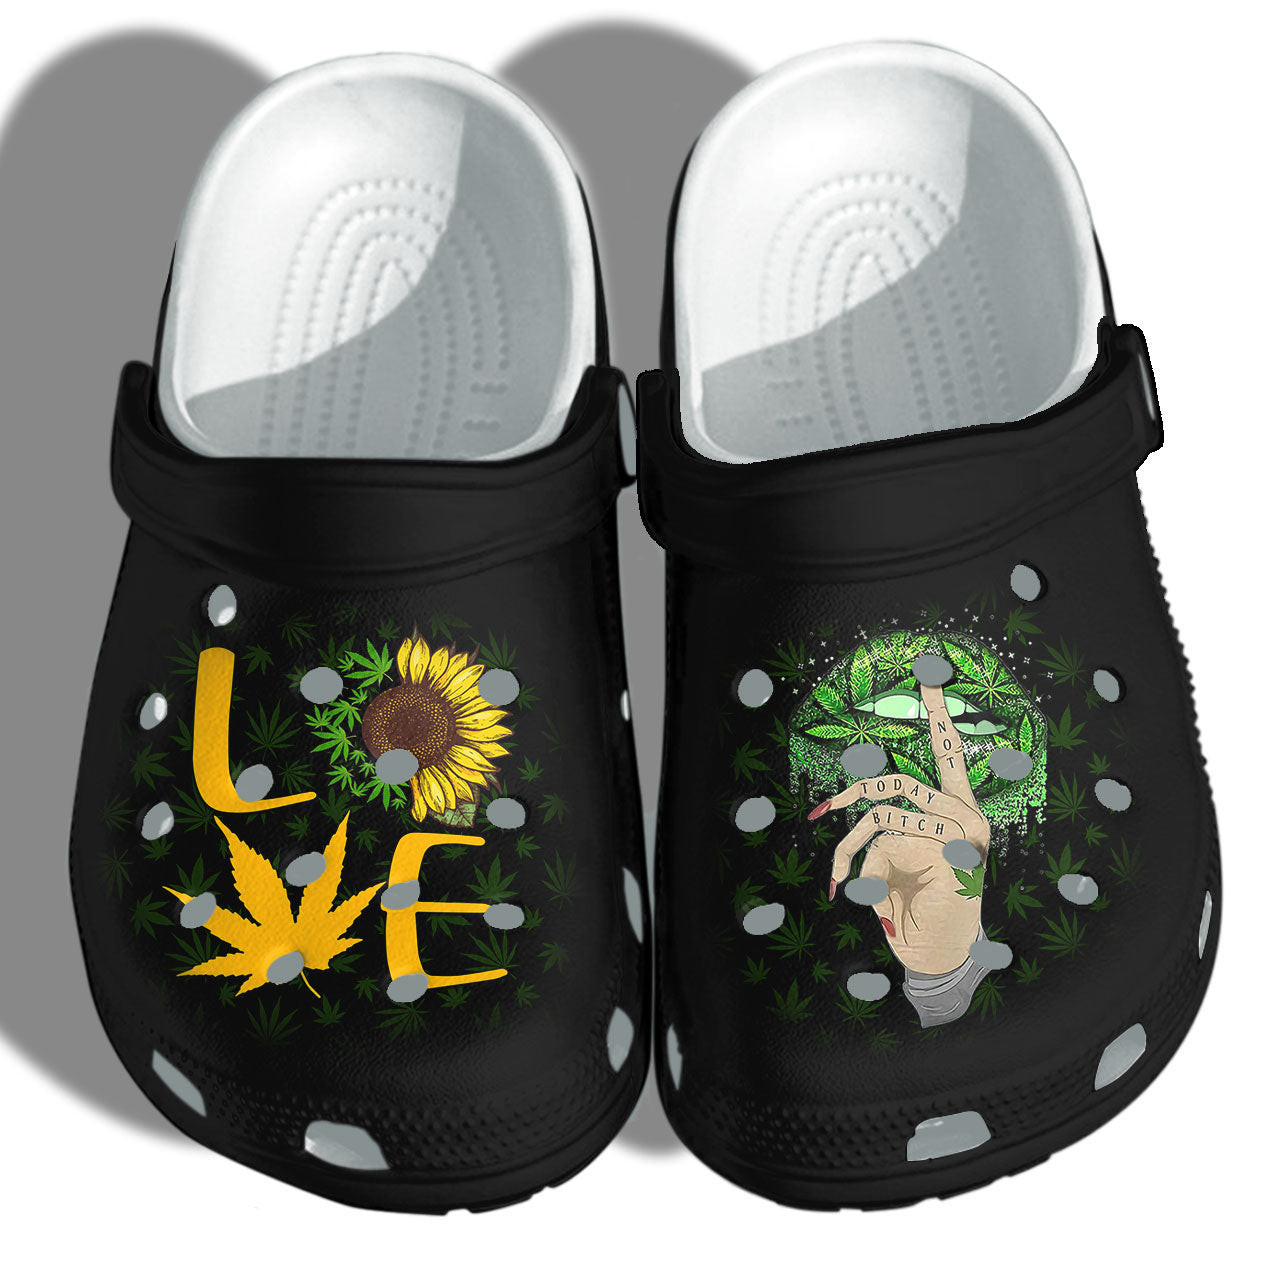 Love Sunflower Weed Crocs Clog Shoes Funny - Shut Up Lip Funny Weed Not Today Custom Crocs Clog Shoes